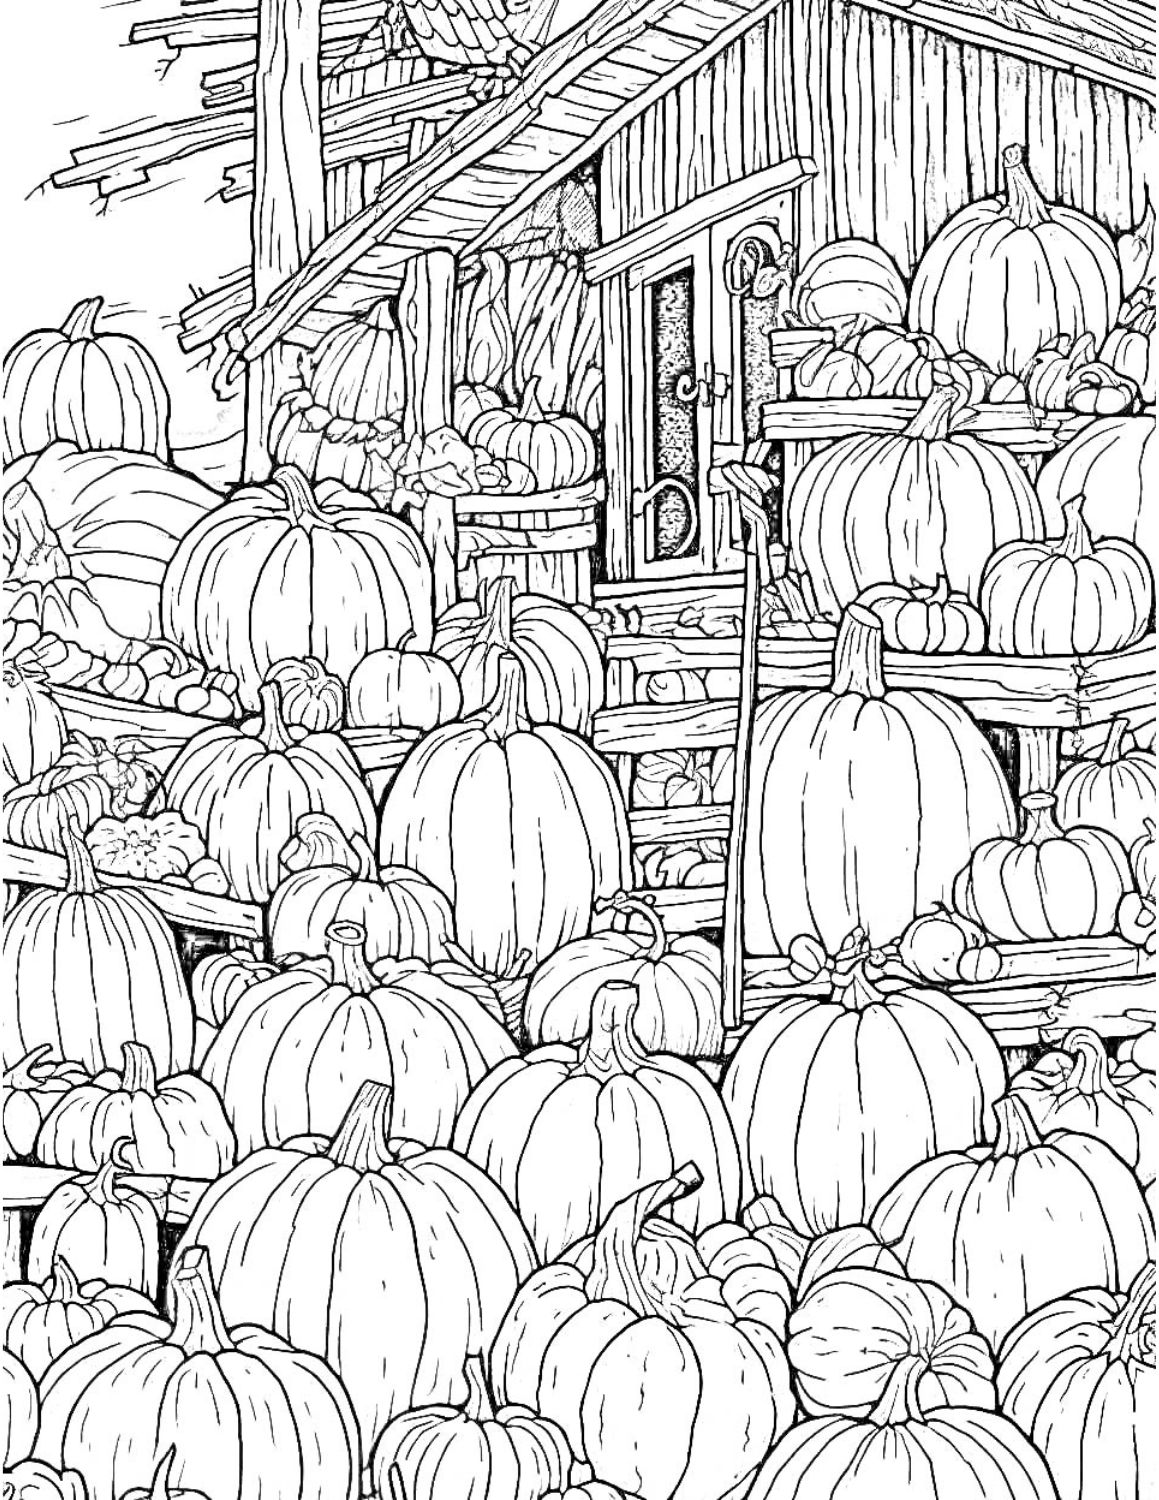 Pumpkin coloring pages for kids and adults